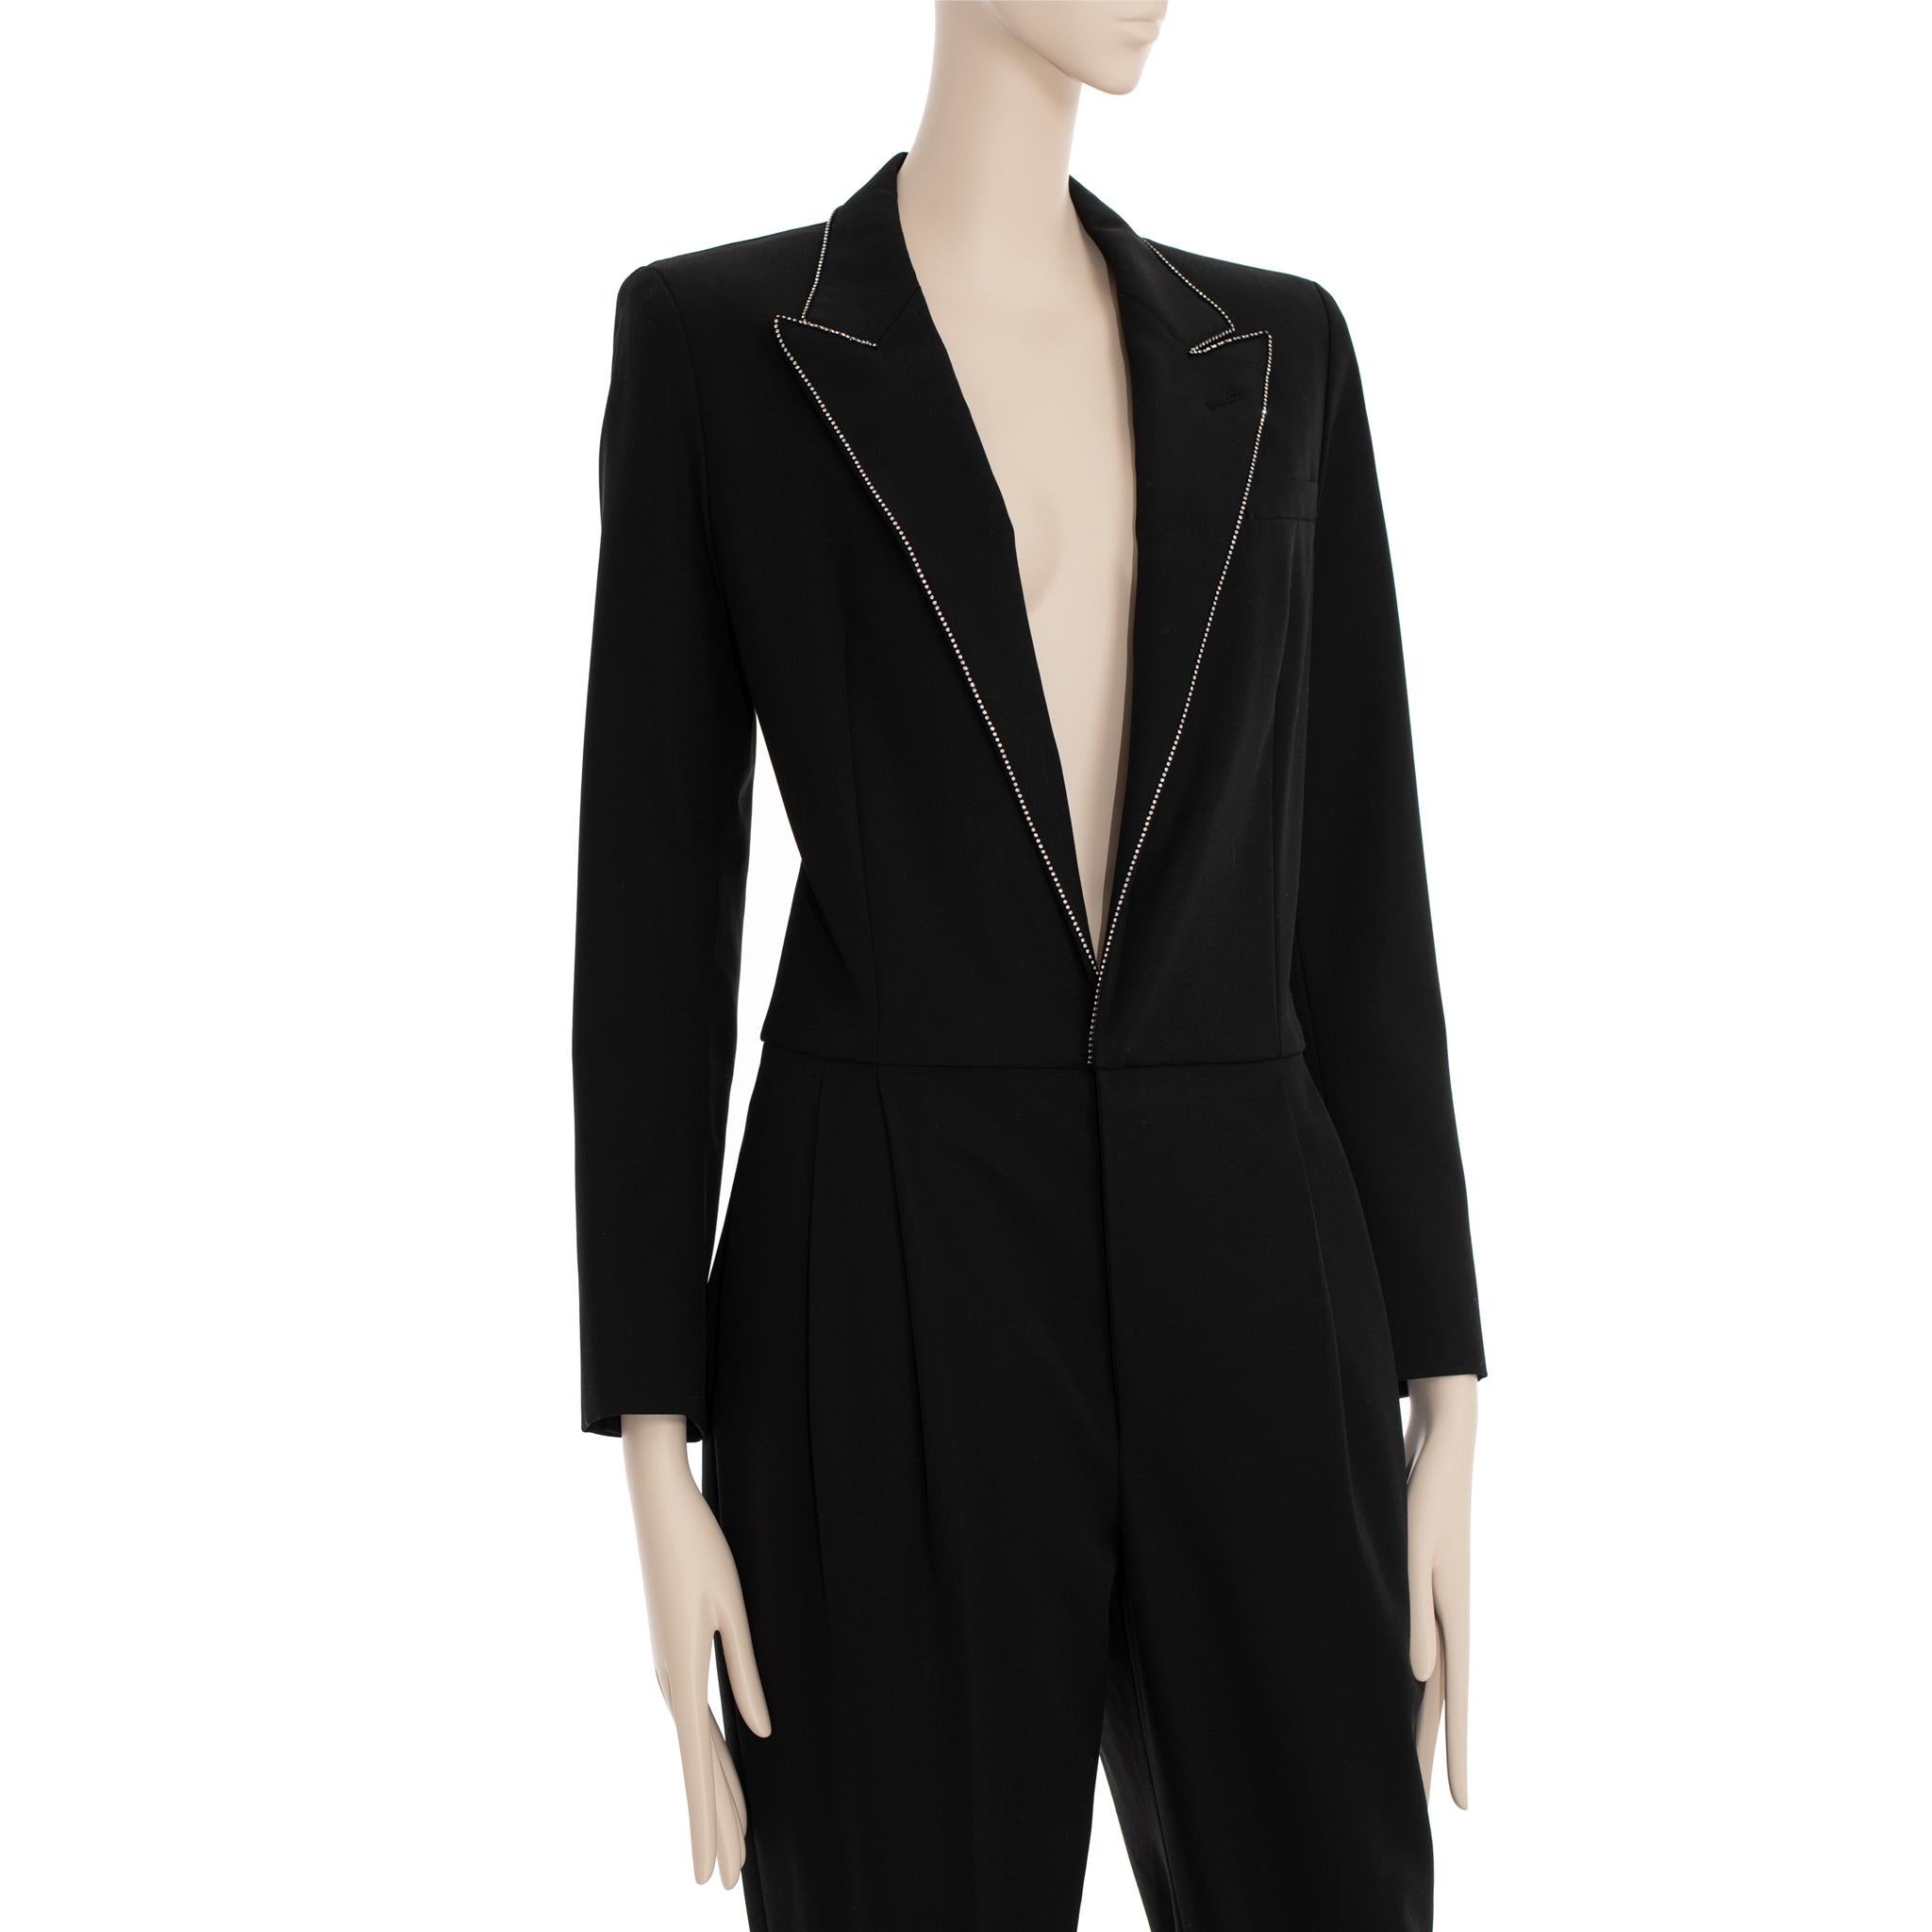 Saint Laurent Black Tuxedo Jumpsuit With Crystals 38 FR In New Condition For Sale In DOUBLE BAY, NSW